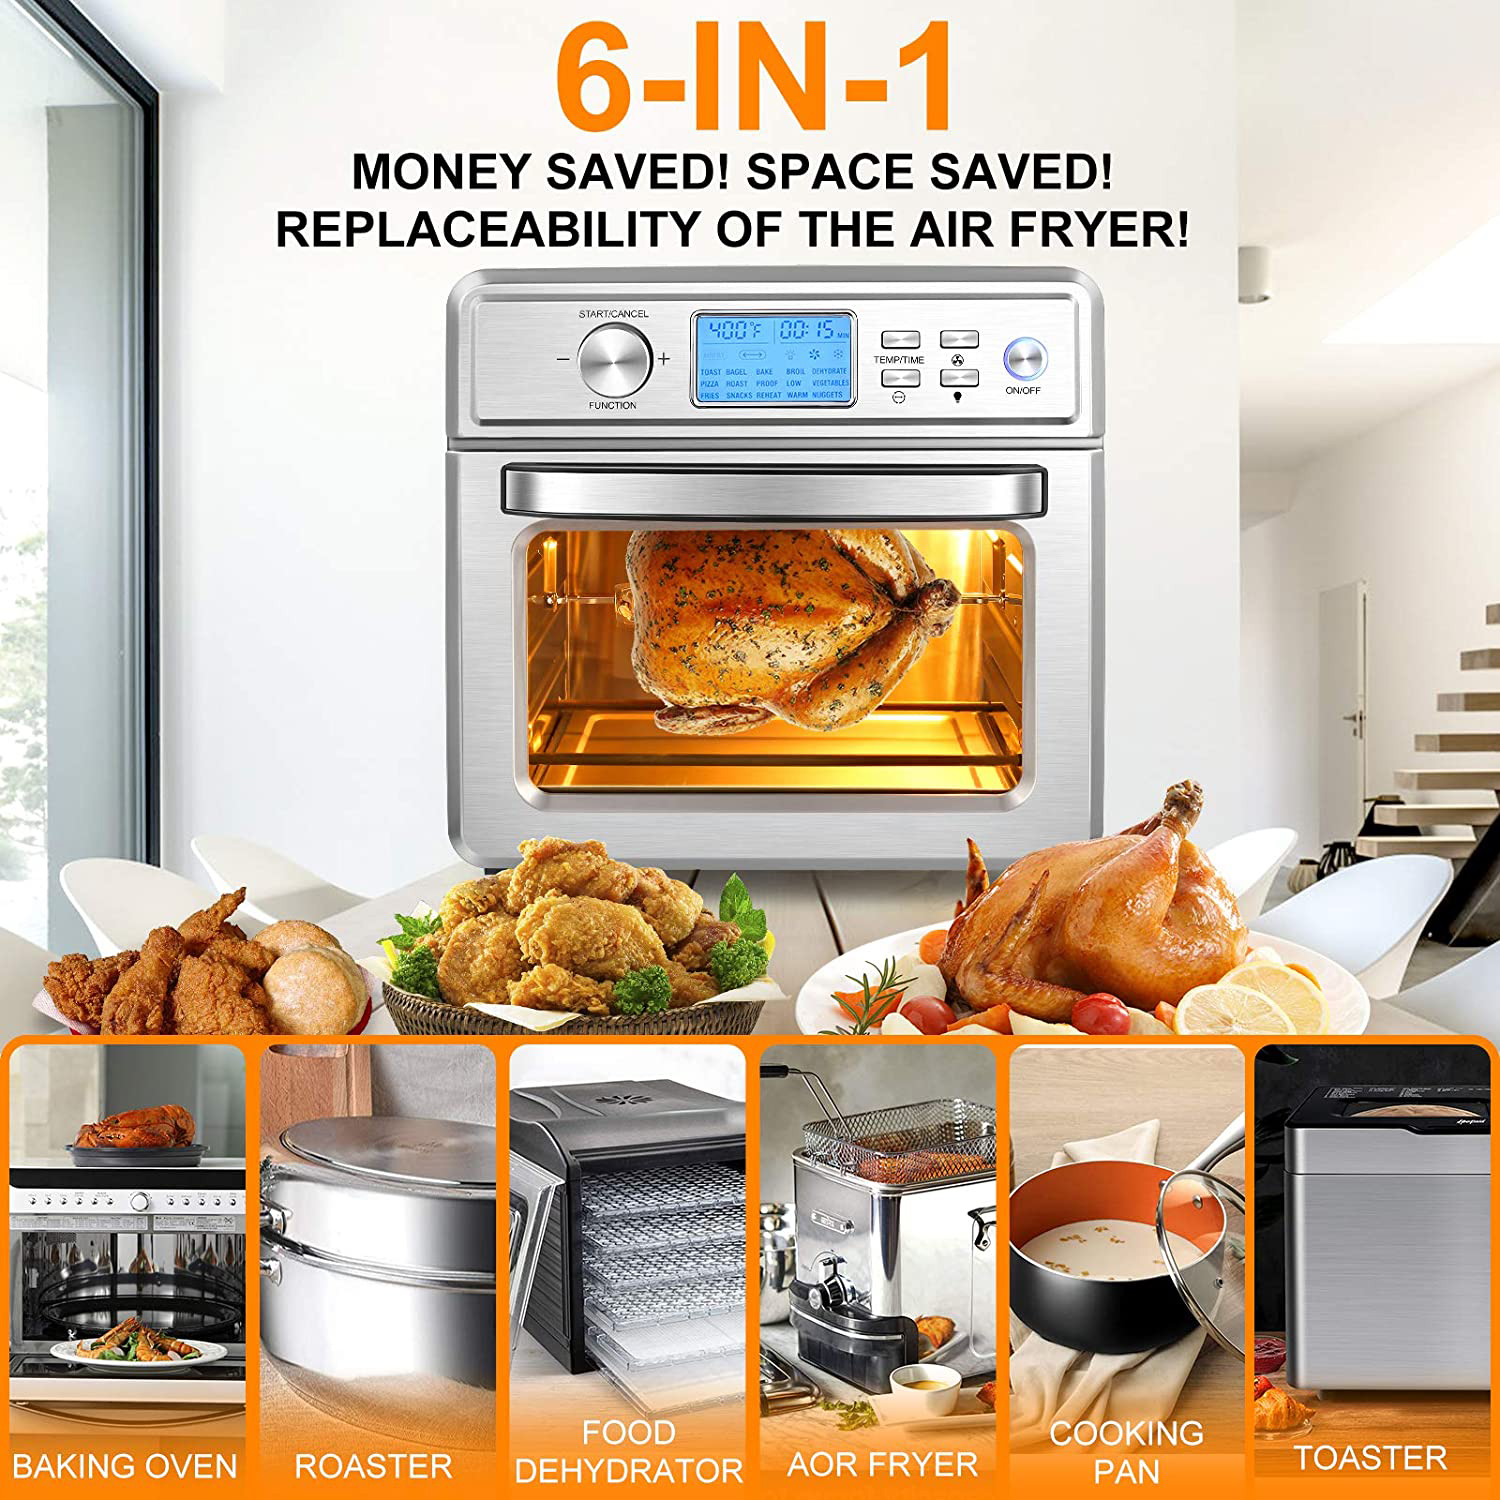 Nictemaw 24.5QT Air Fryer, 16-in-1 Air Fryer Oven, 1700W Electric Air Fryer Toaster Oven, Presets for Baking, with LED Display & Temperature/Time Dial, Roaster, Broiler, Rotisserie - image 3 of 11